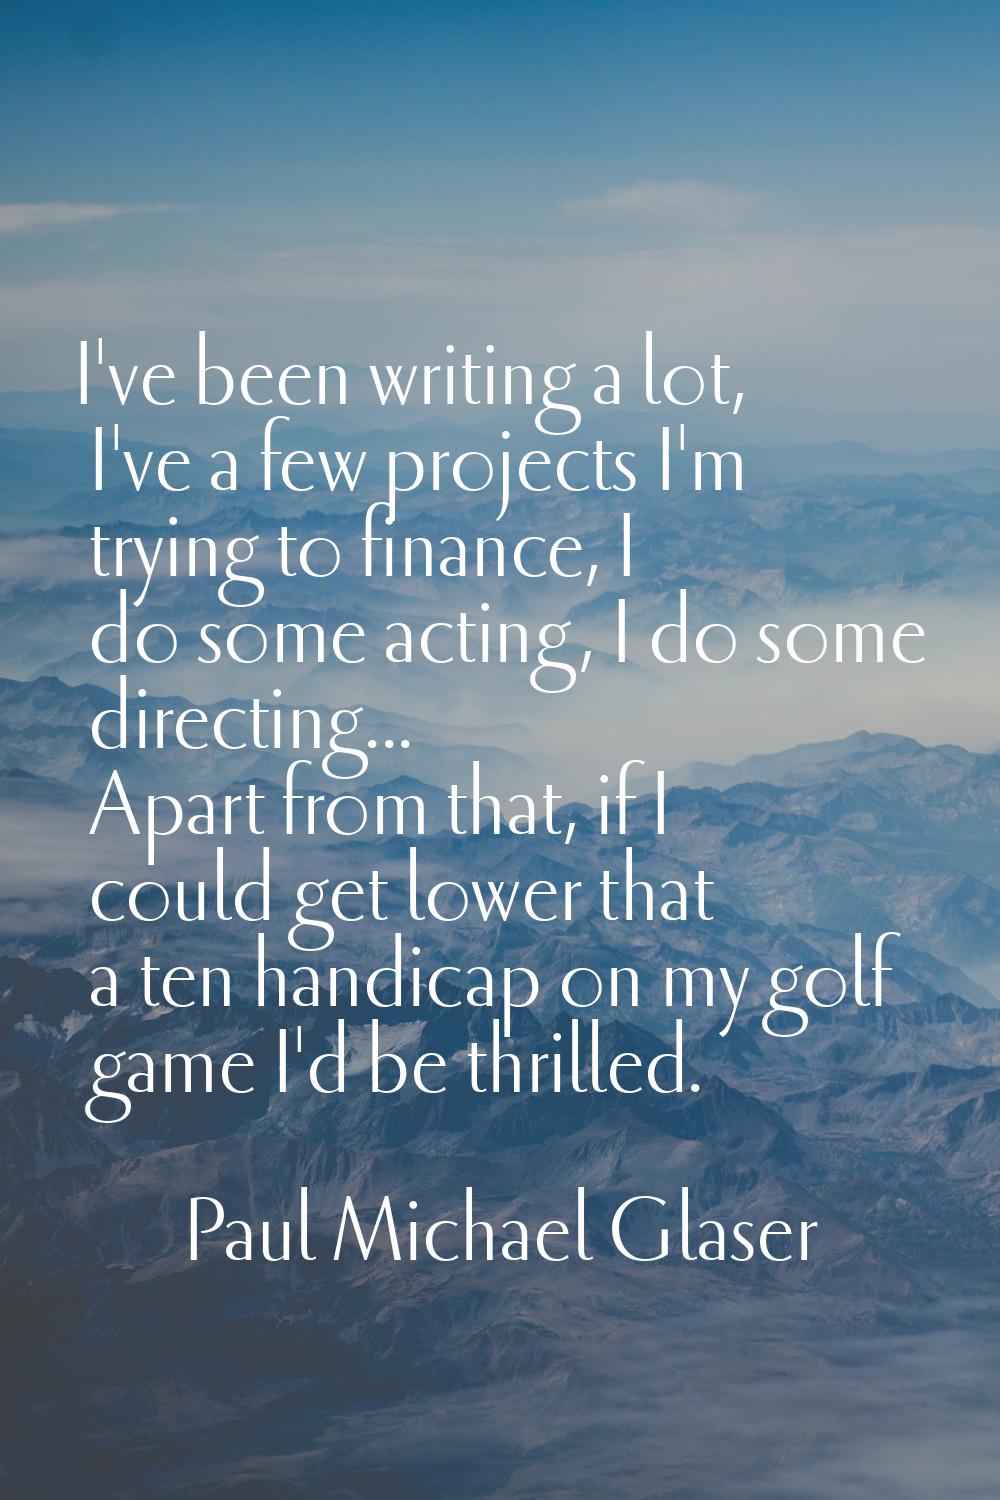 I've been writing a lot, I've a few projects I'm trying to finance, I do some acting, I do some dir